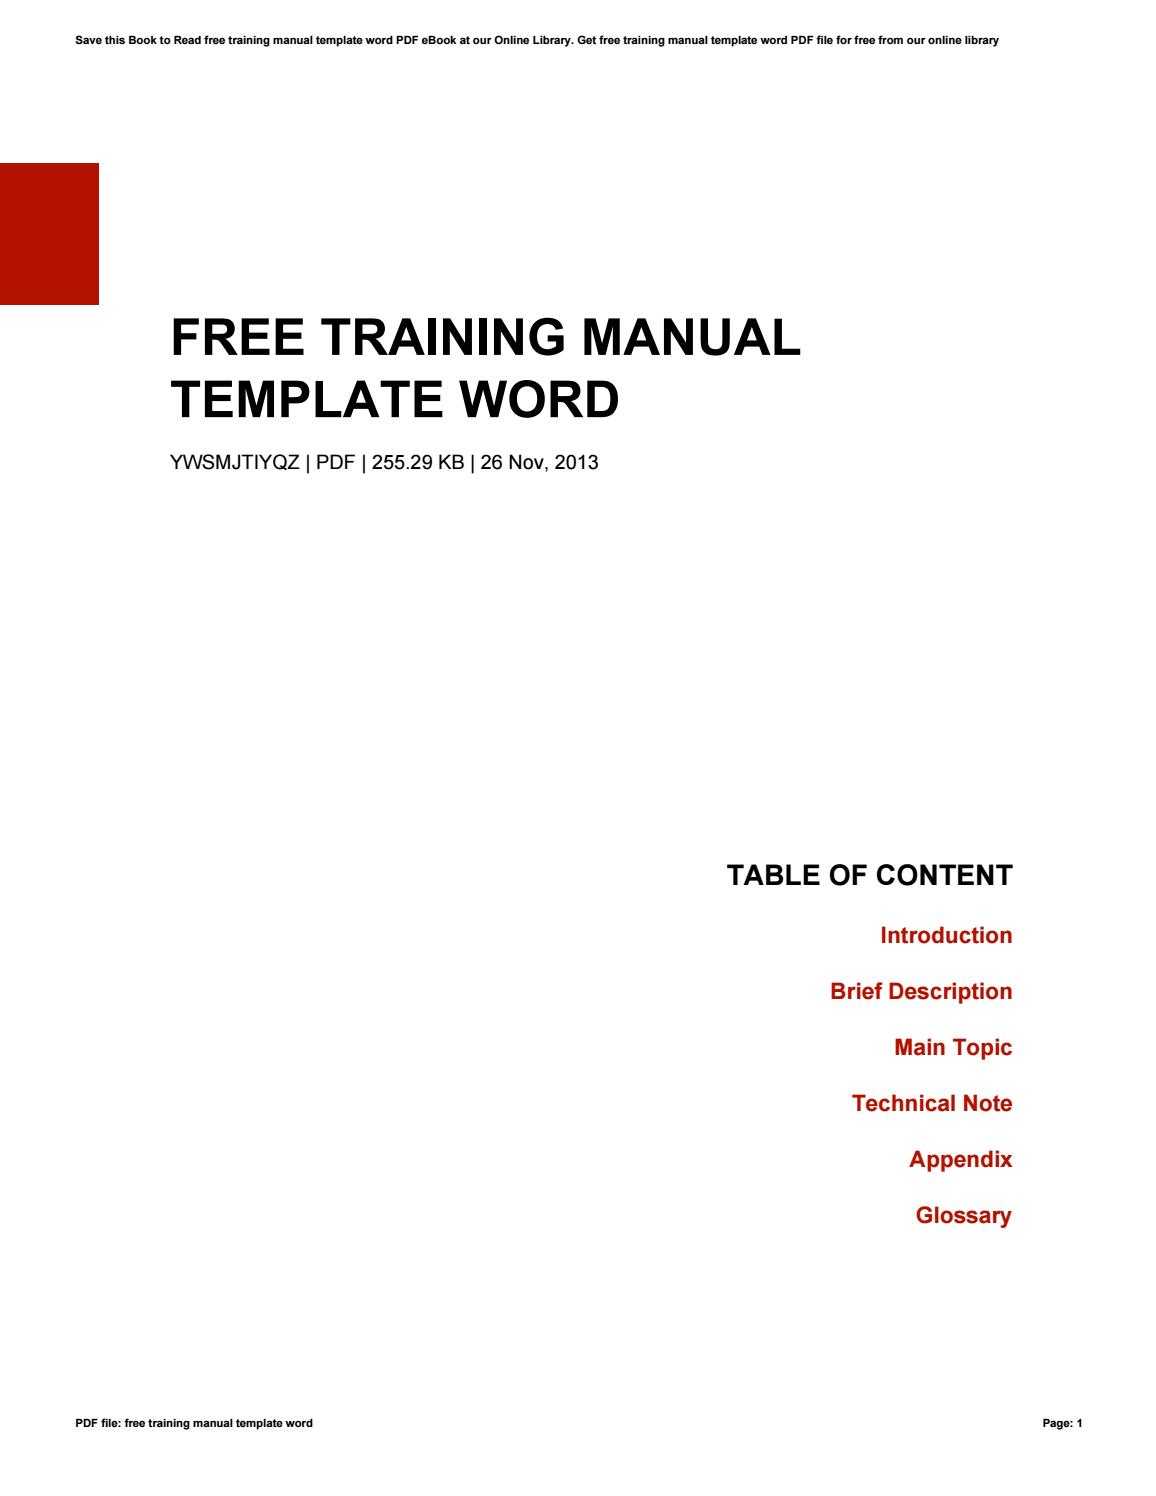 Free Training Manual Template Wordkazelink257 - Issuu Intended For Training Documentation Template Word